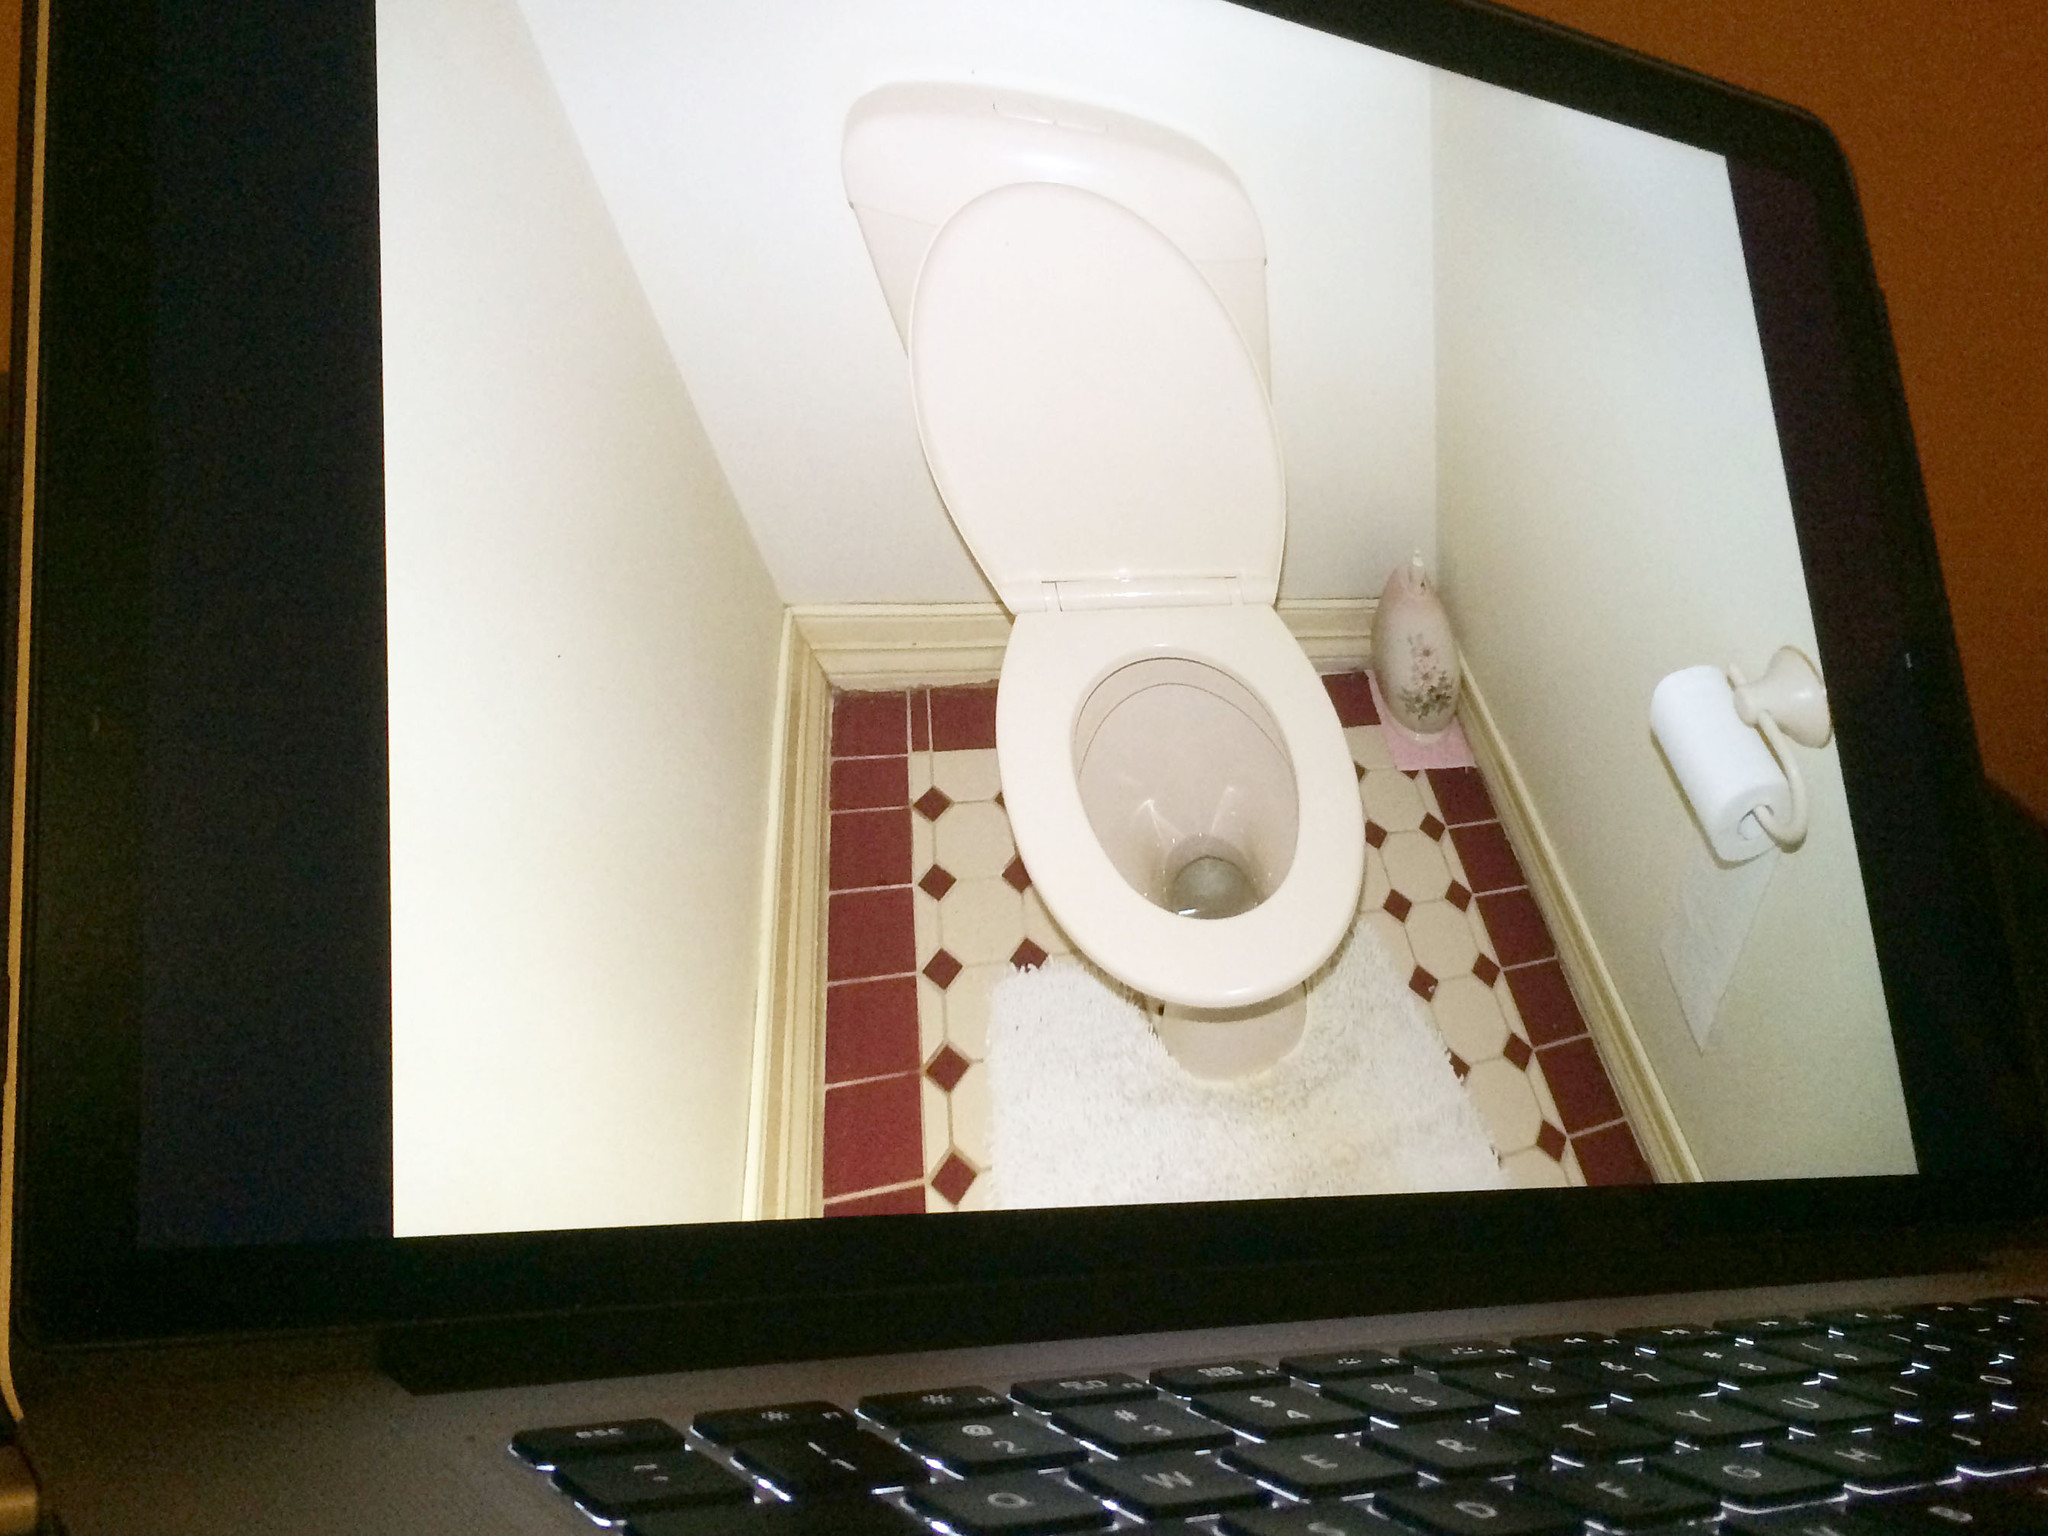 NSFW: Your Mac is not a toilet